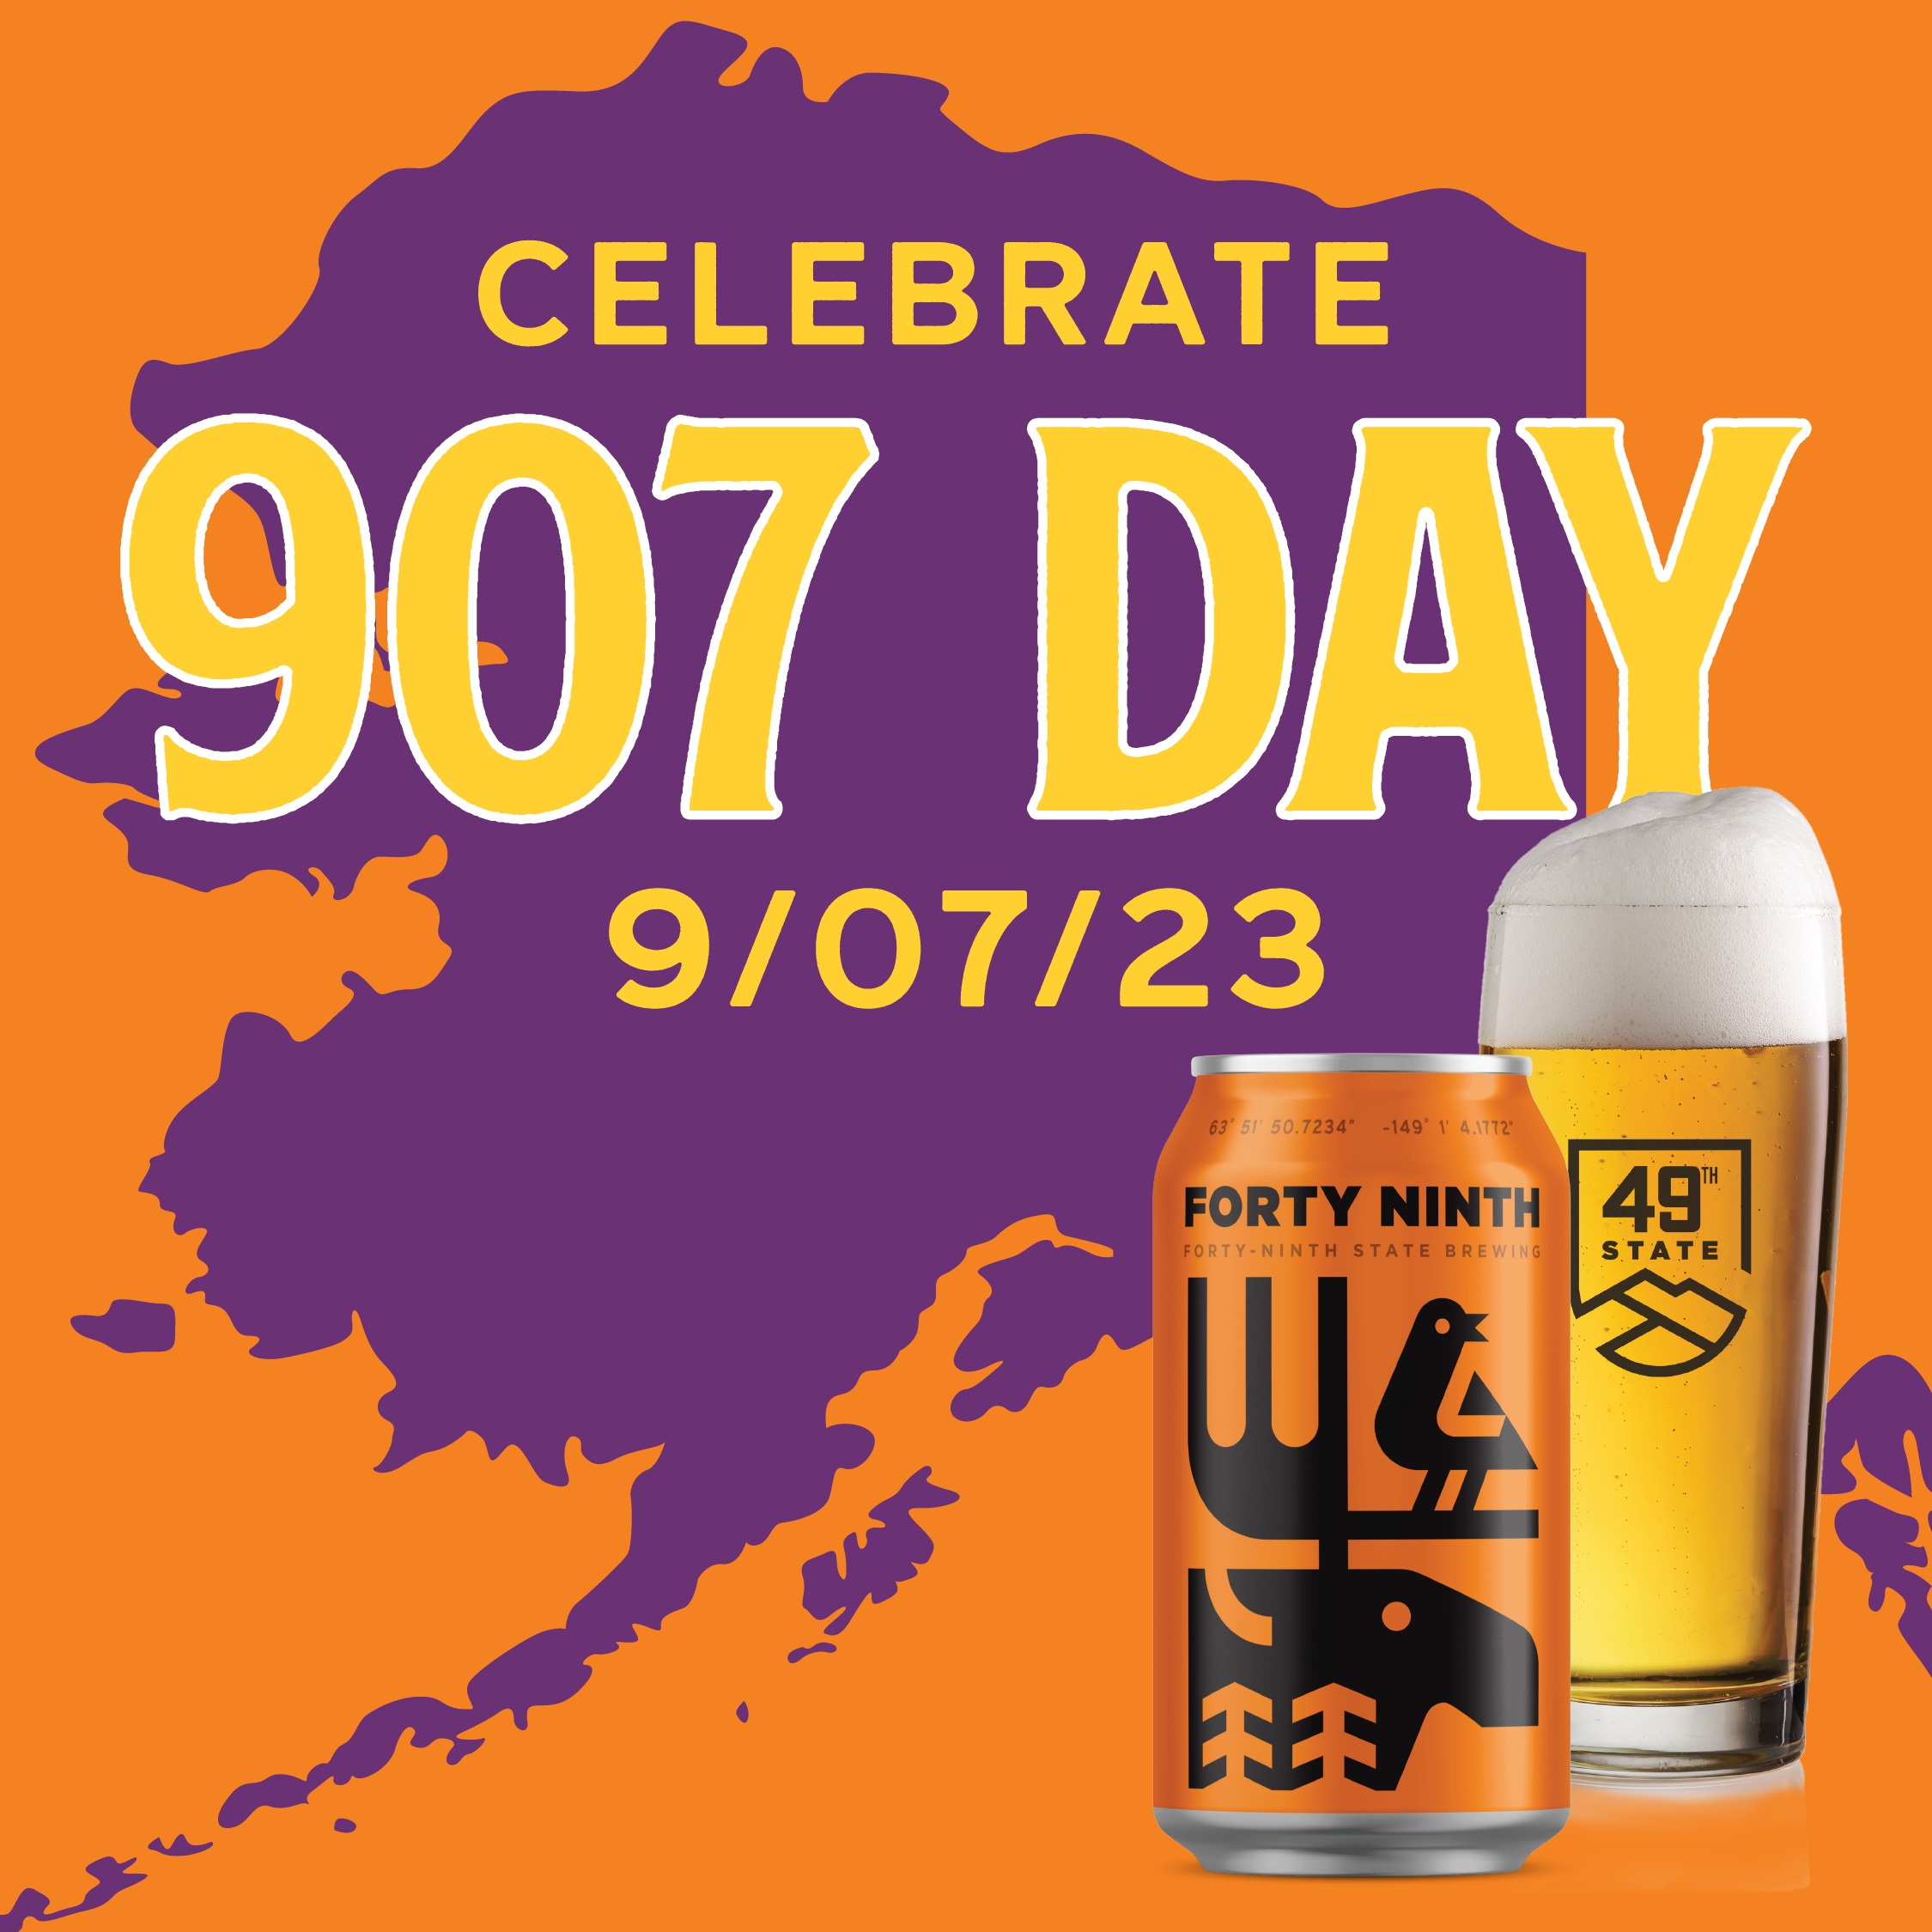 Celebrate 907 Day With Us On 9/07/23